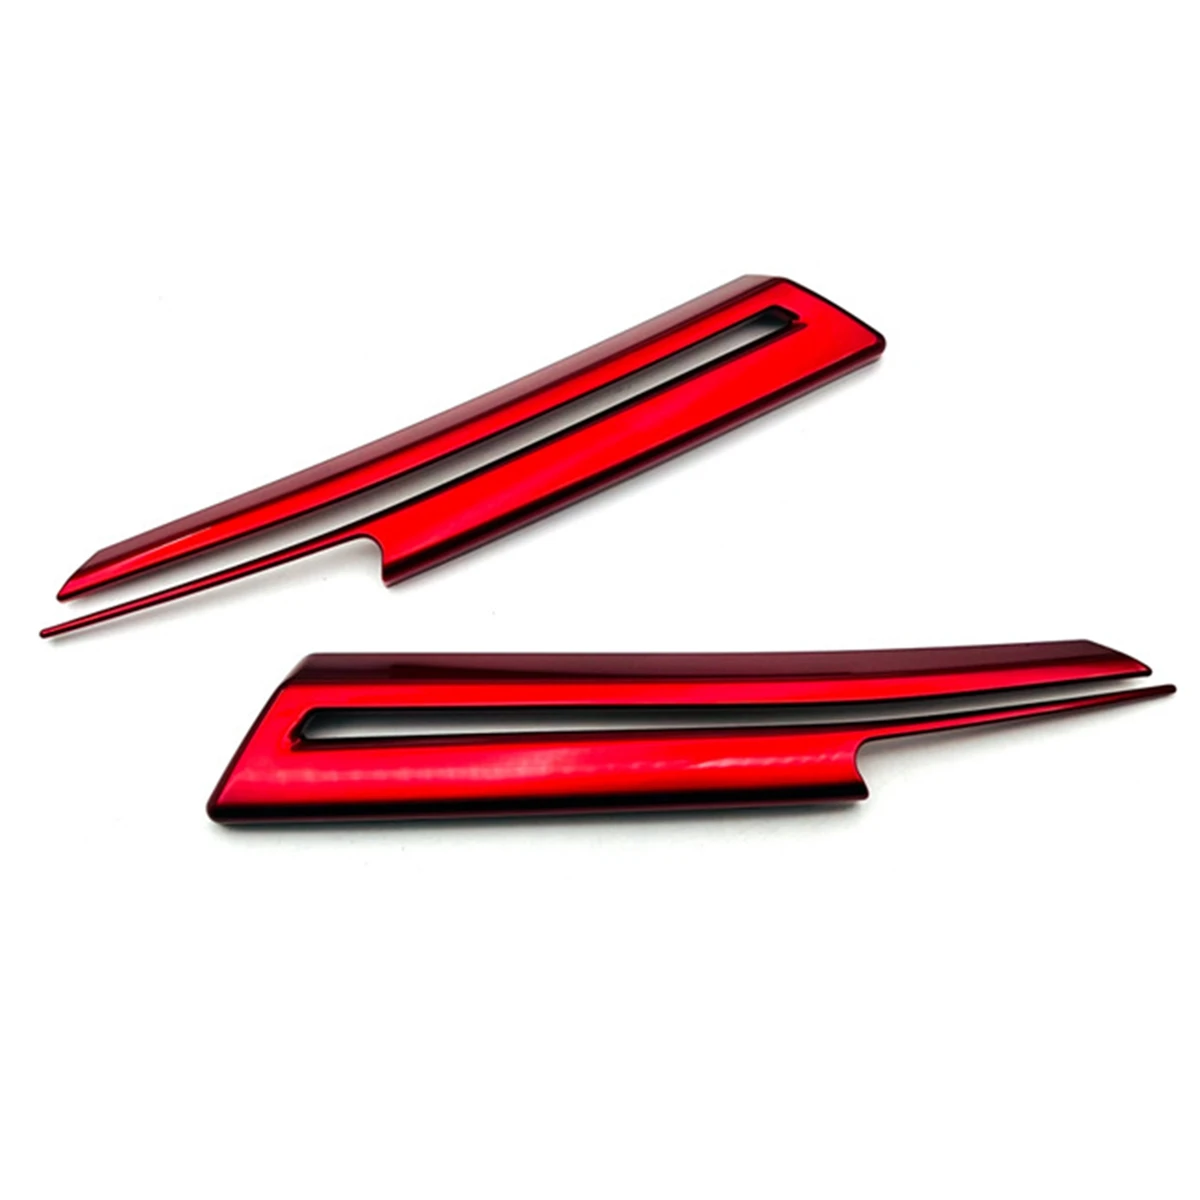 

Car Front Grill Grille Cover Decorative Trim Strips Mouldings for Subaru XV/Crosstrek 2021 2022 2023 Red